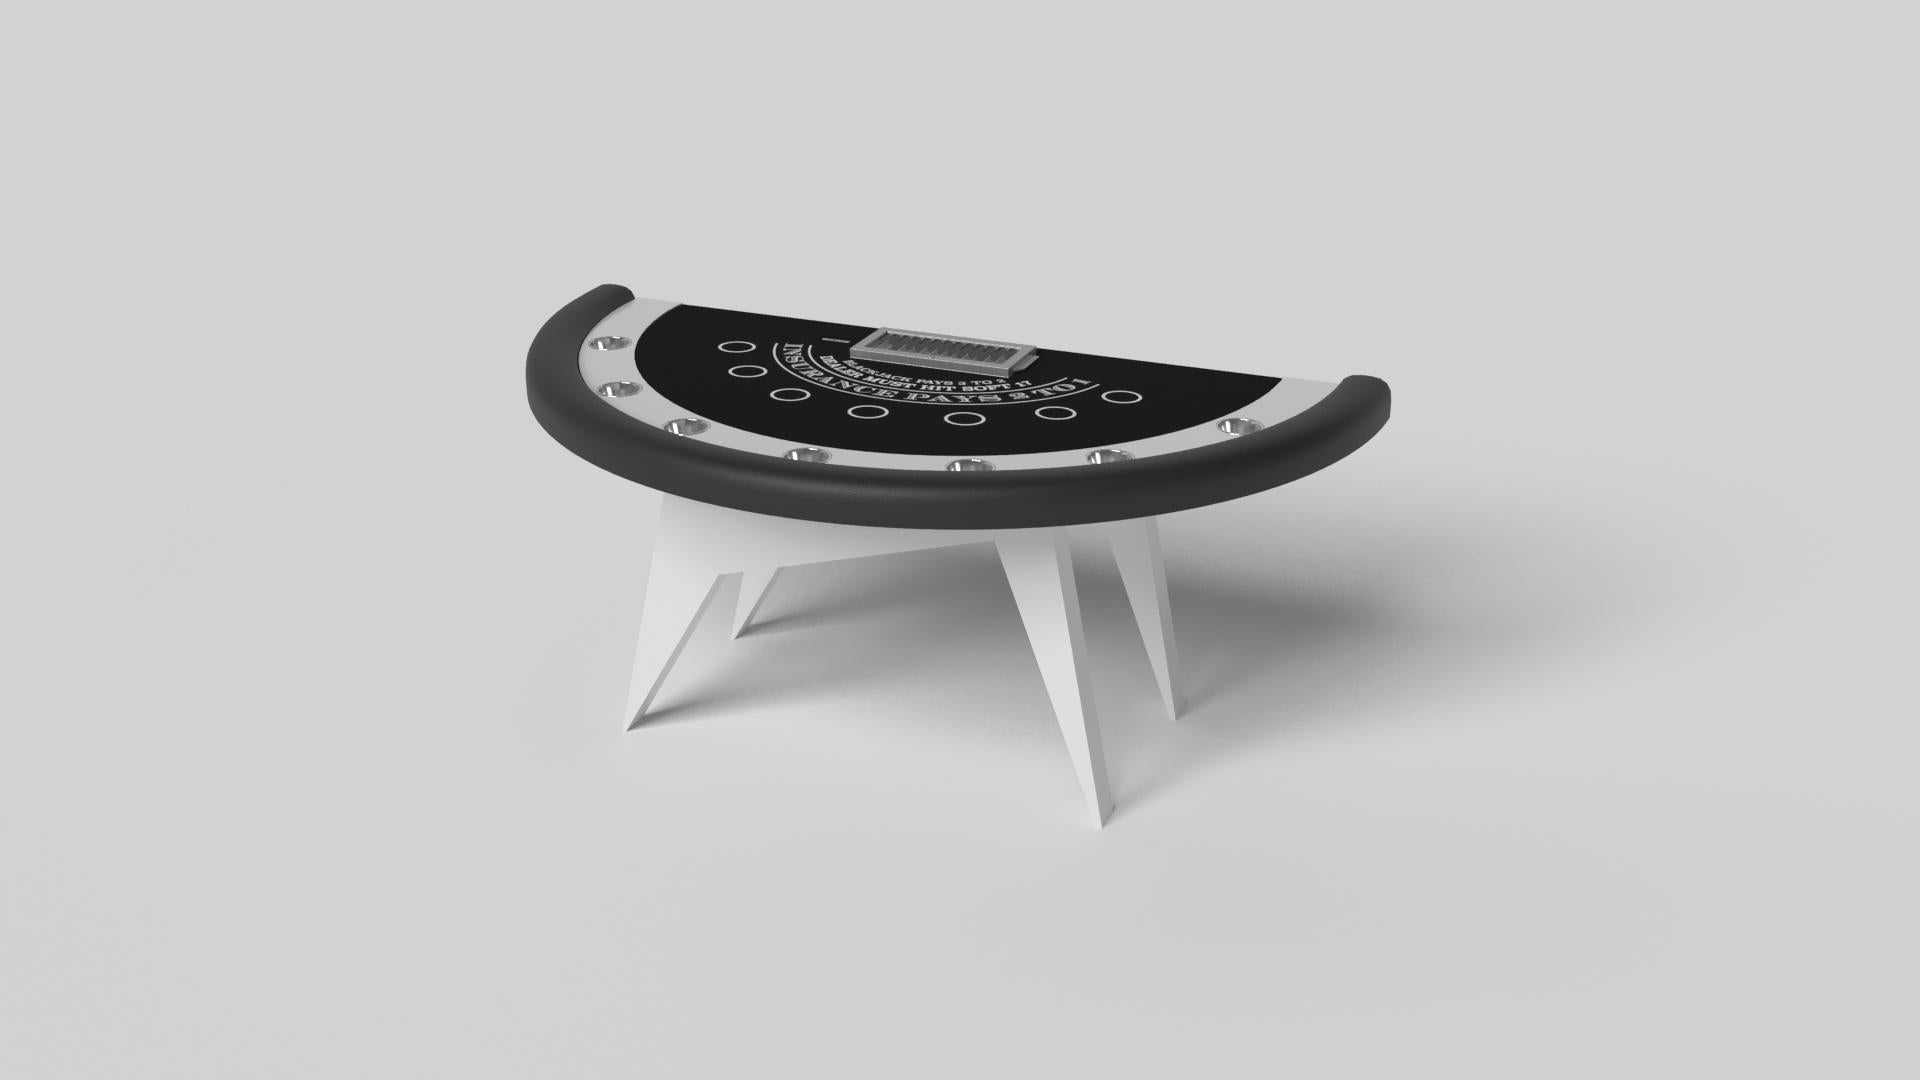 Simple yet sophisticated, the Mantis blackjack table puts a fresh, modern spin on a classic four-legged design. Sharp angles and tapered legs provide sleek stability.

Size:

88”X46”X30” (Bar Height)
Custom Sizes Available Per Request